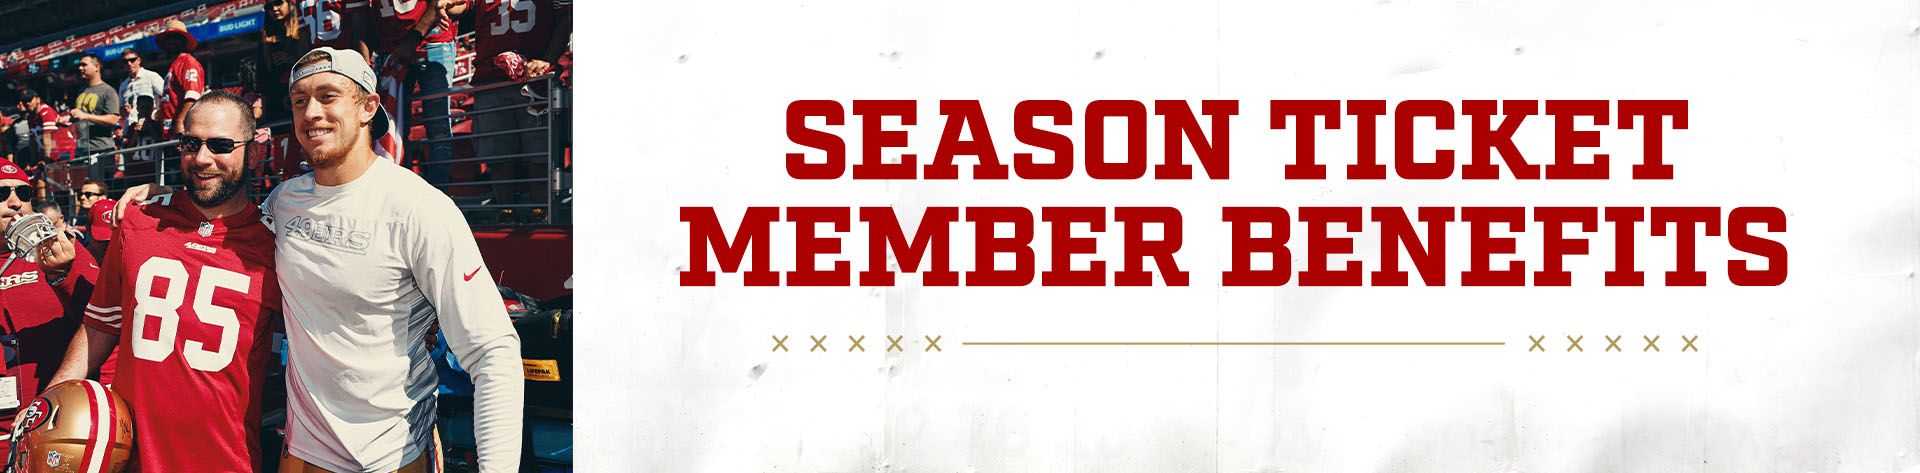 49ers offering season ticket holders a full refund for the upcoming season  - Niners Nation